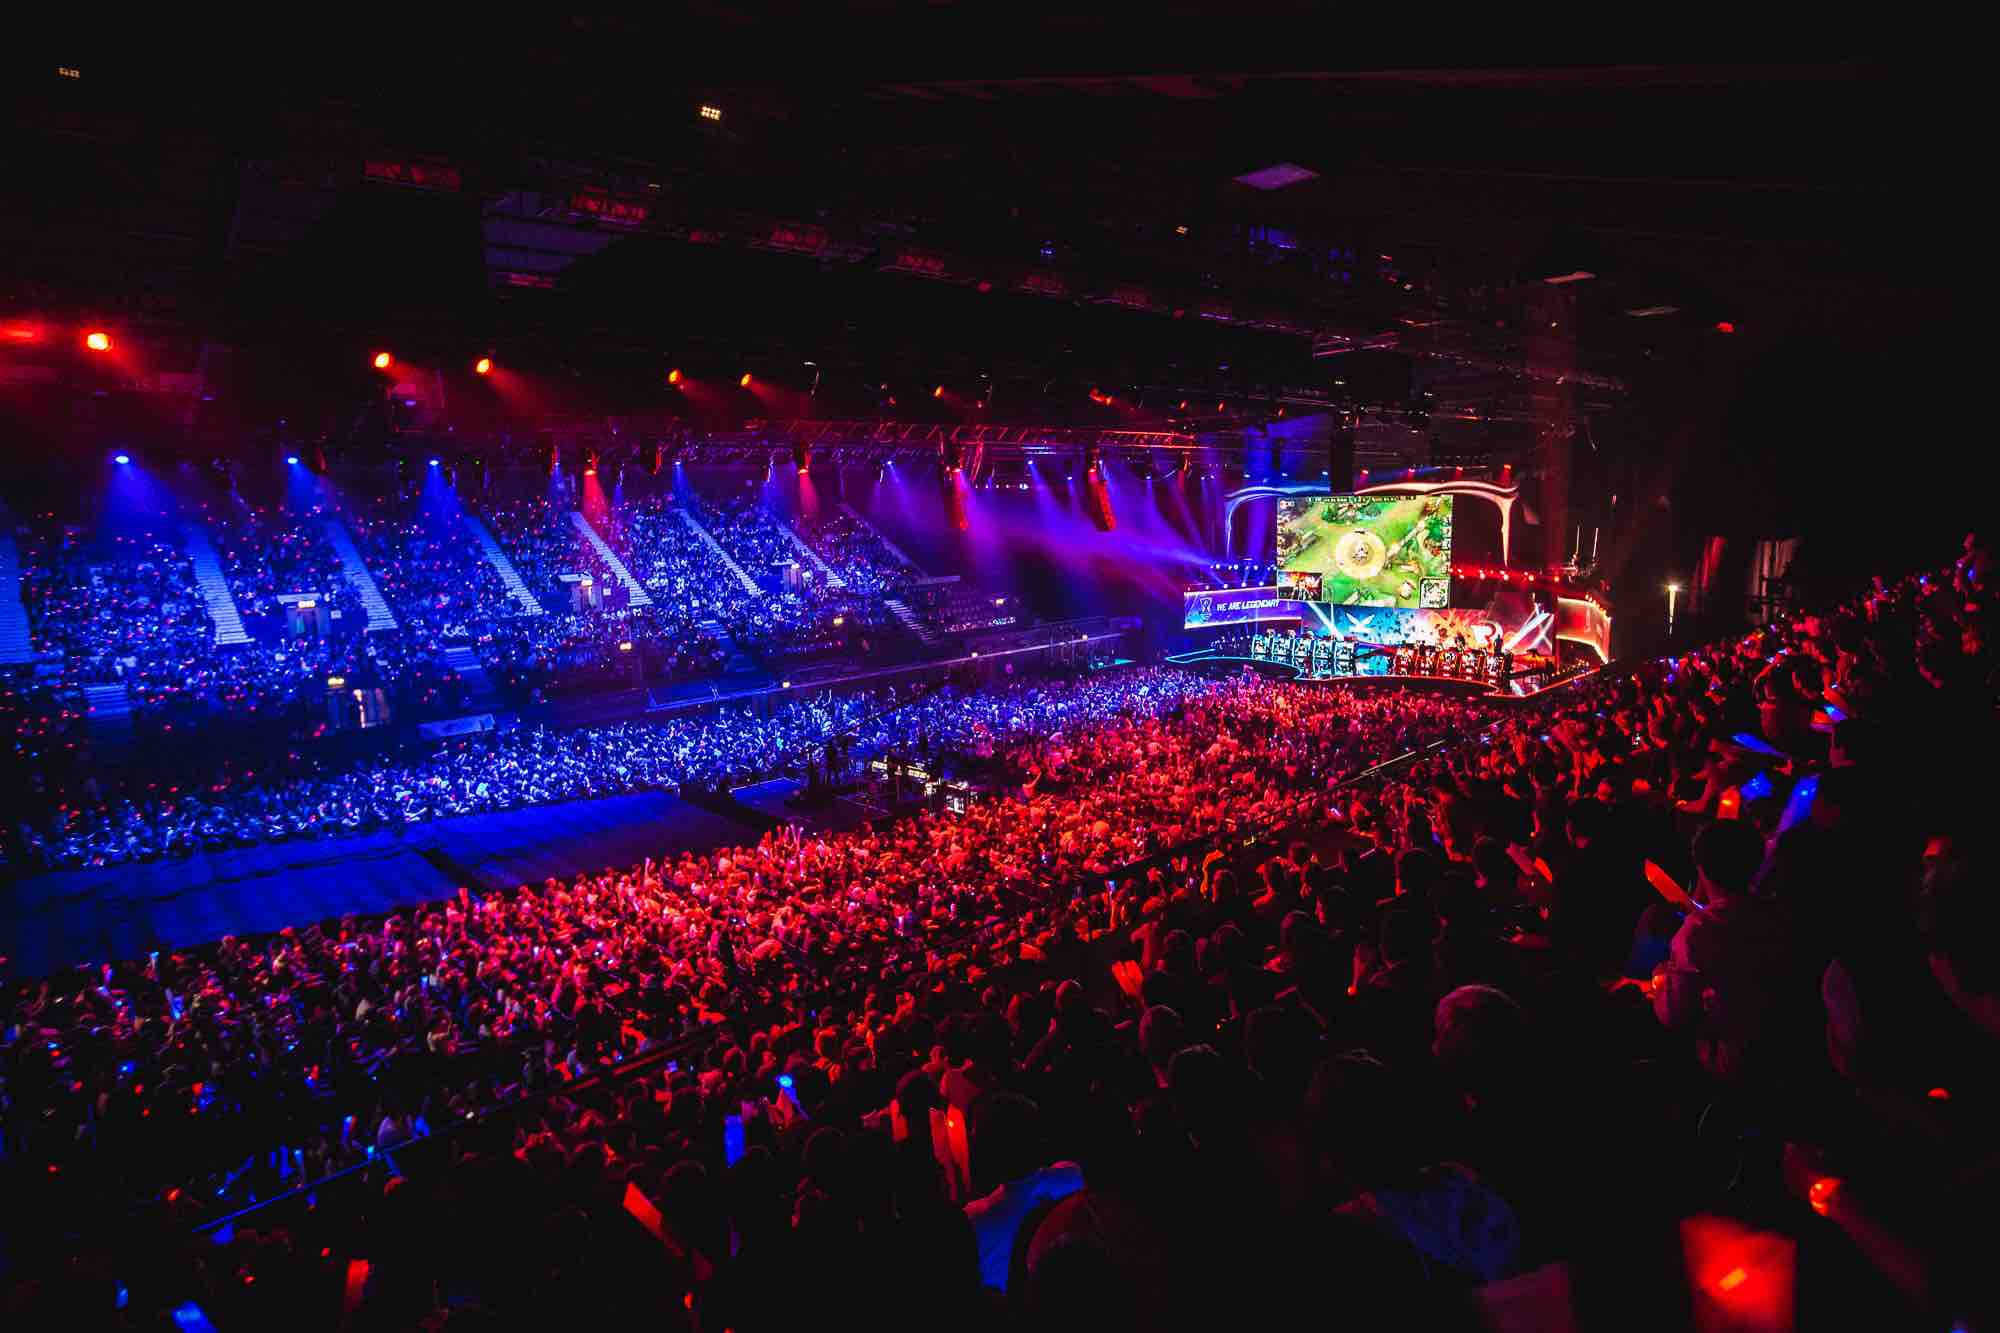 Inside the 2015 League of Legends World Championship held in London